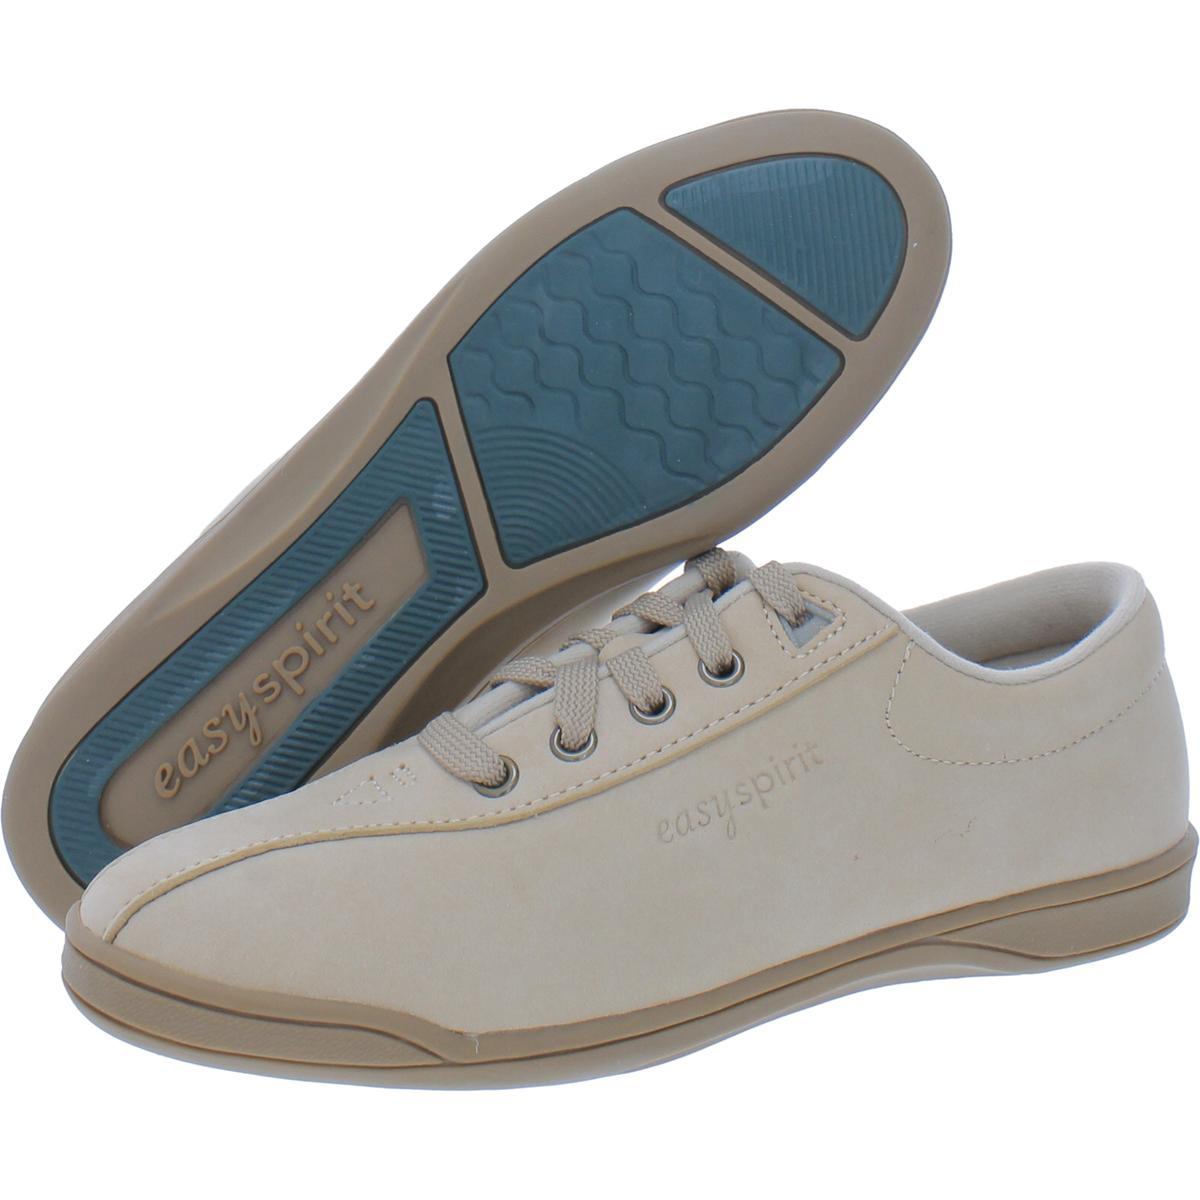 Easy Spirit Womens AP1 Leather Low Top Lace Up Sneakers Shoes BHFO 4680 ...